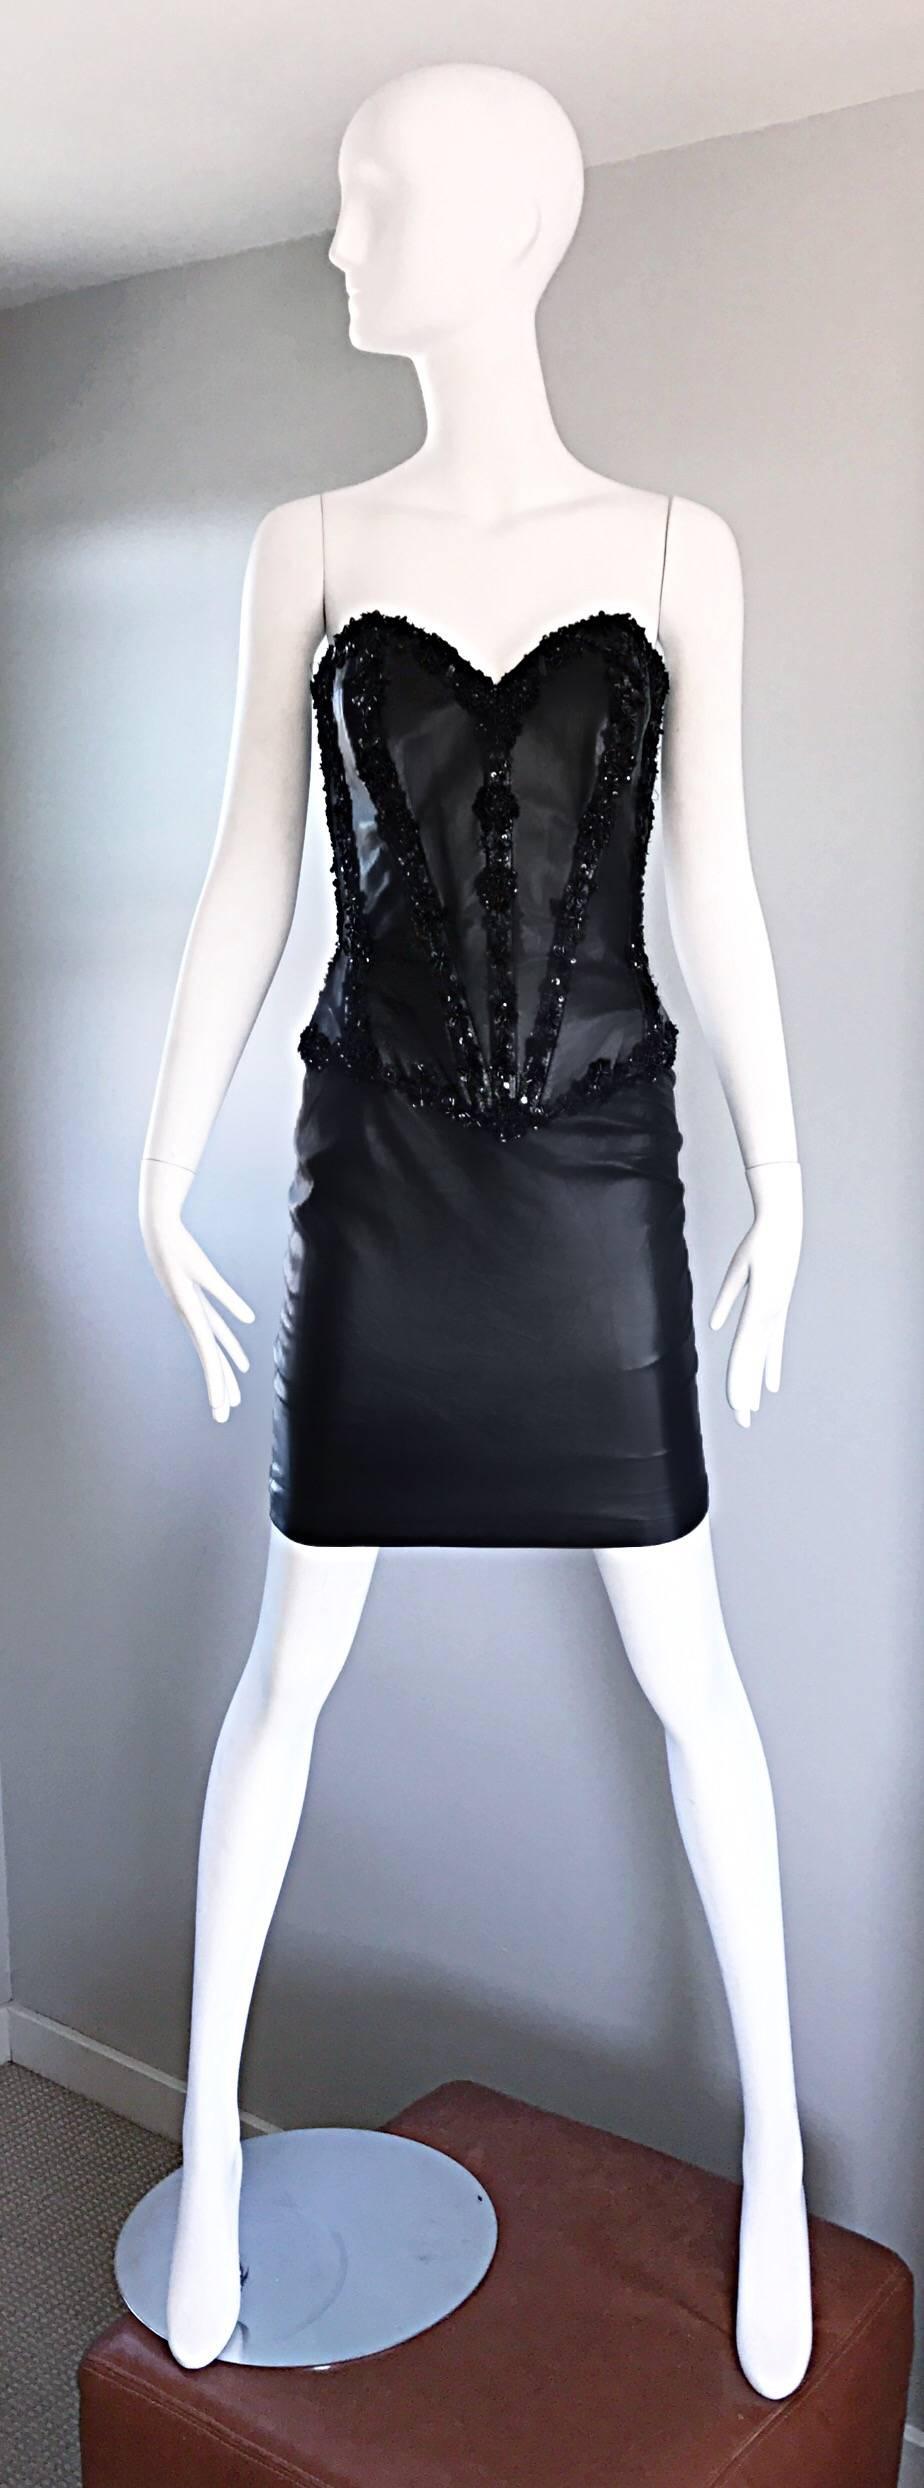 Sexy vintage VICKY TIEL COUTURE for Neiman Marcus 1990s 90s black lambskin leather Bodycon strapless bustier/corset dress! Fitted boned leather bodice, with hand-sewn sequined and beaded panels throughout the front and back. Haute couture